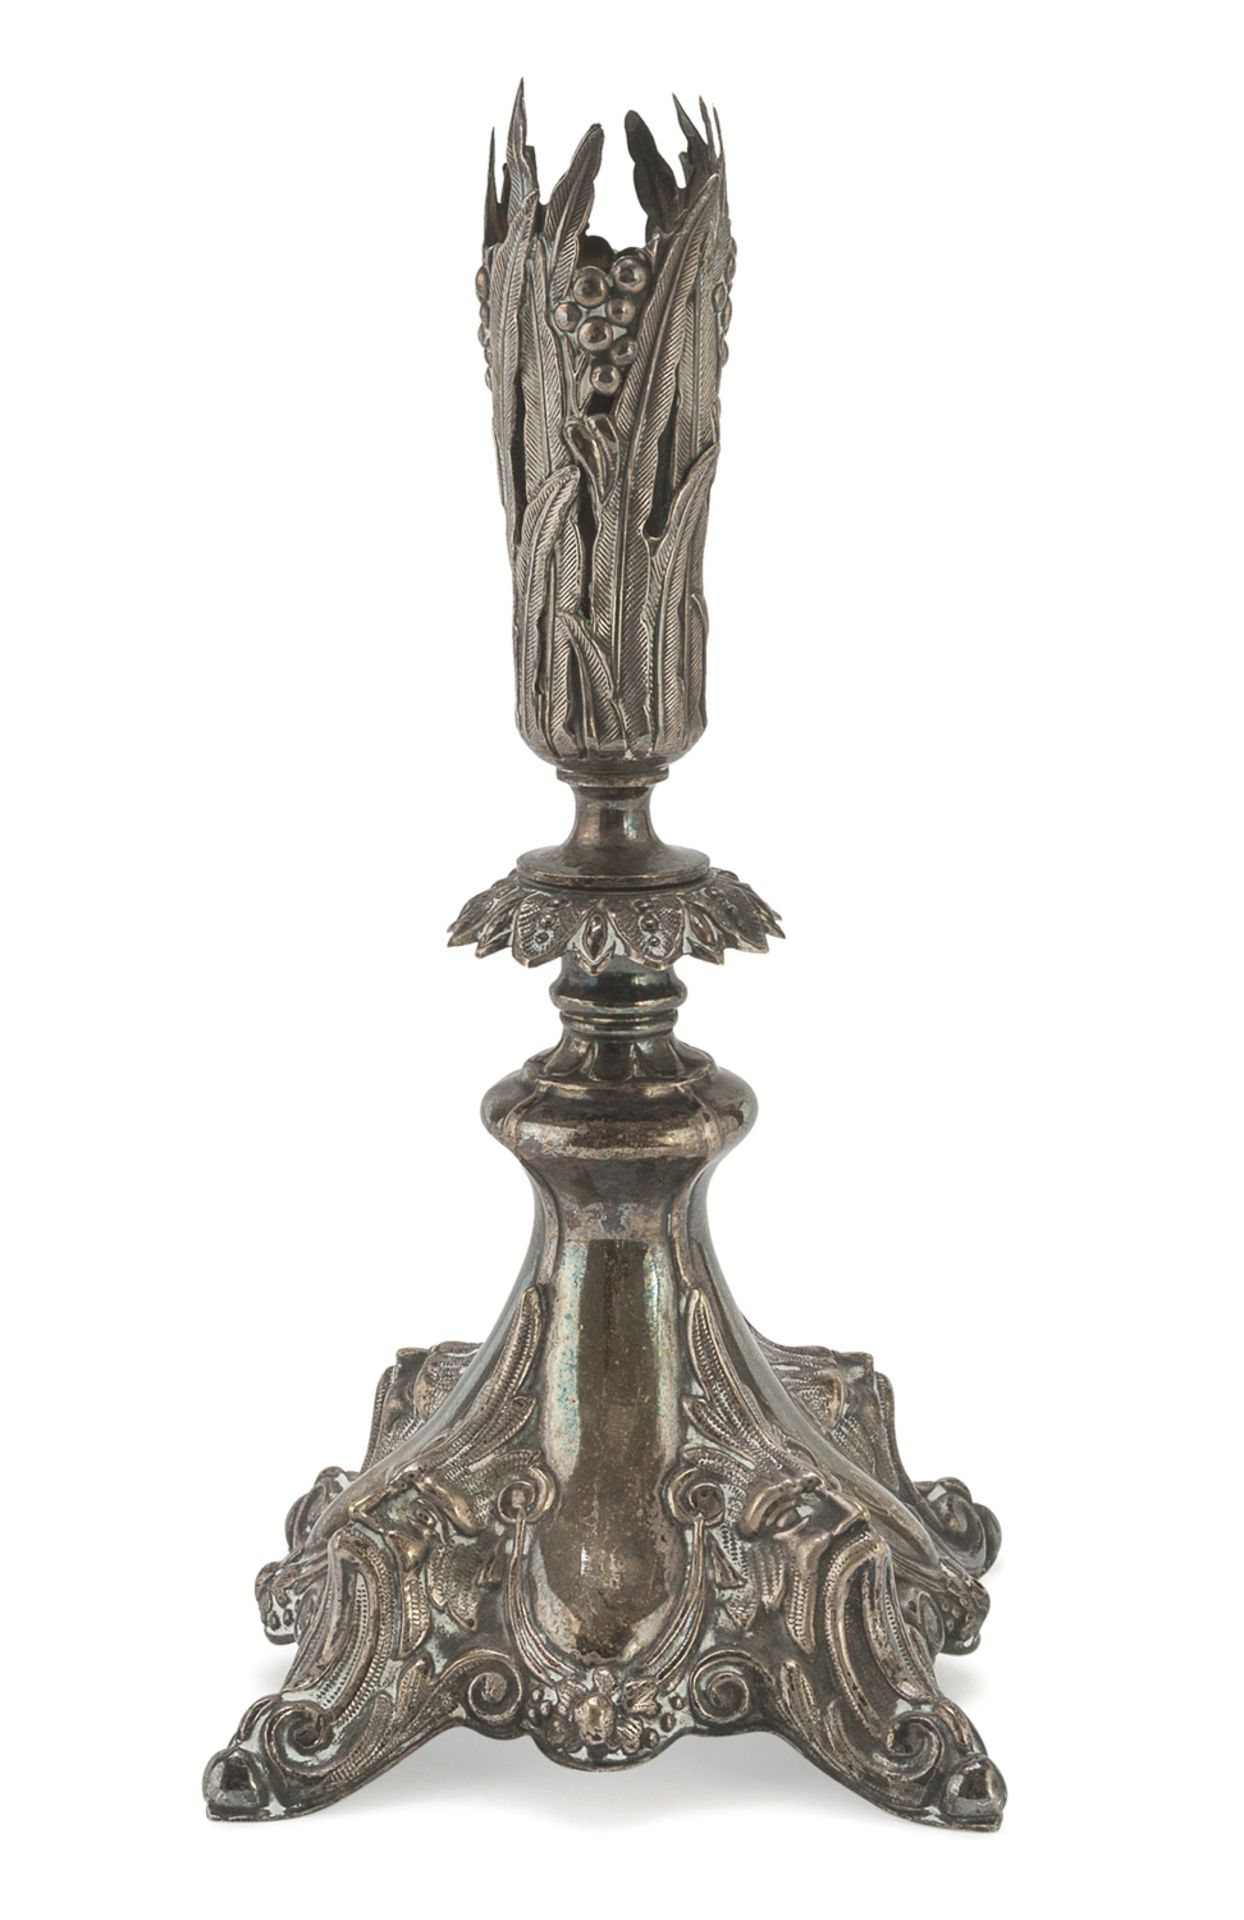 SILVER-PLATED CANDLESTICK ITALY